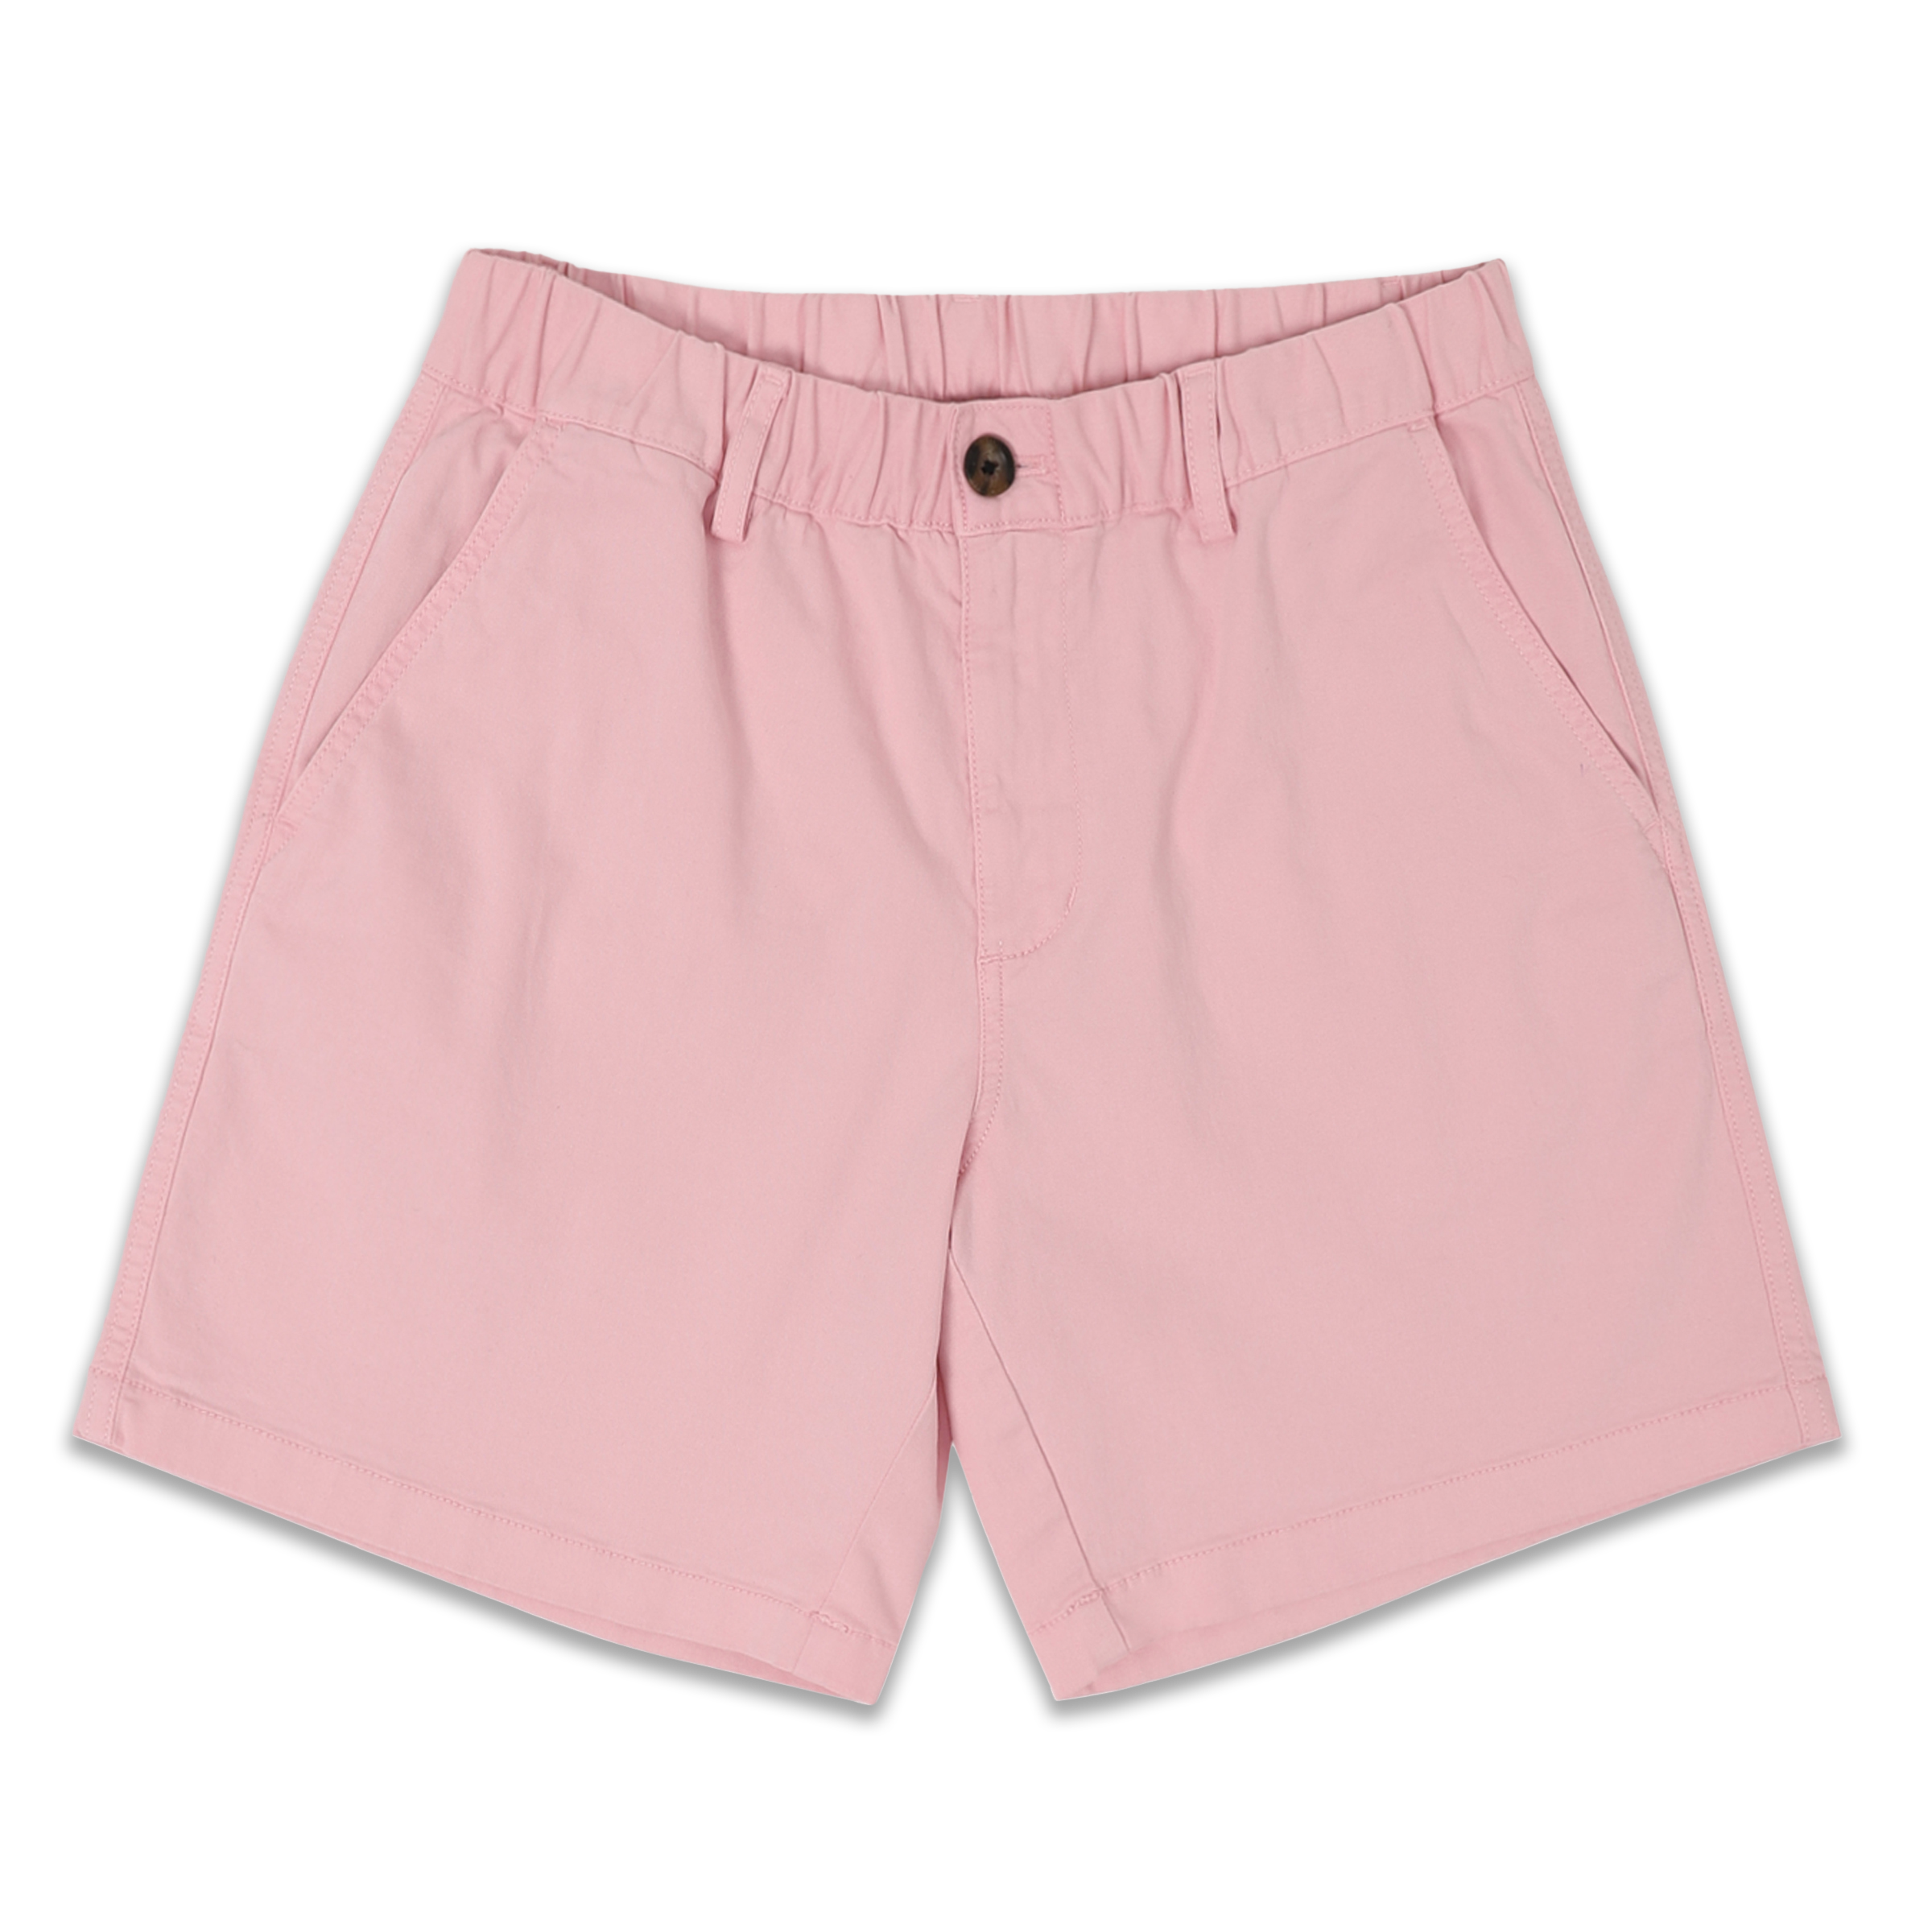 Stretch Short 7" Pink front with elastic waistband, belt loops, zipper fly, faux horn button, and two inseam pockets